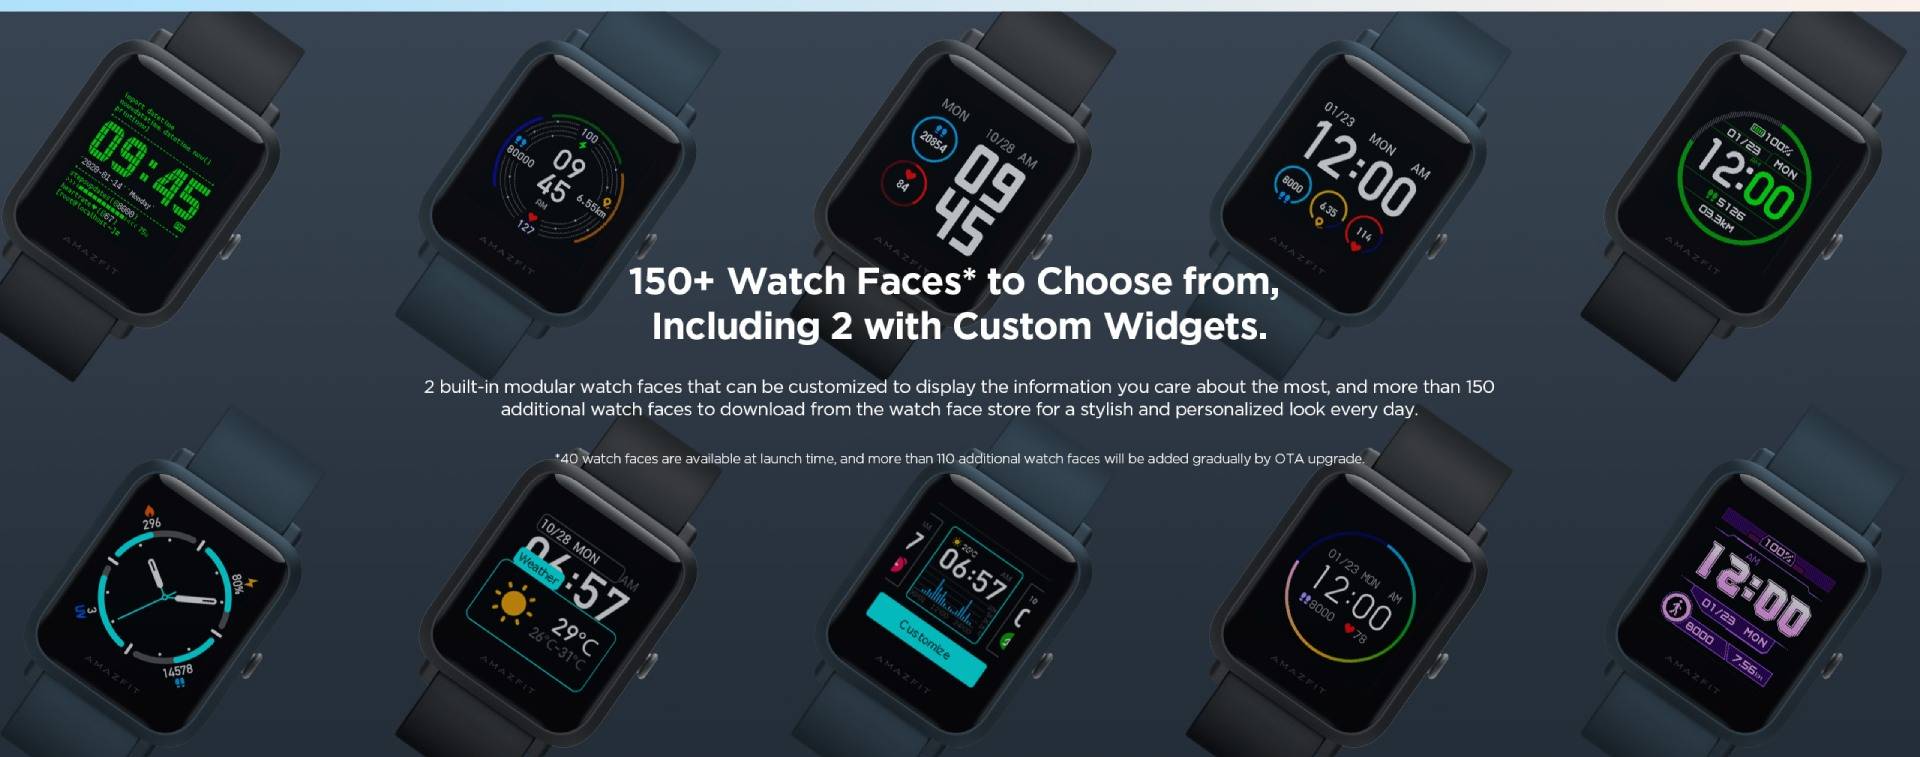 Amazfit Smartwatch Sale 2020: AmazFit Bip S Lite Watch to be on Flash Sale  at 12 PM Tomorrow